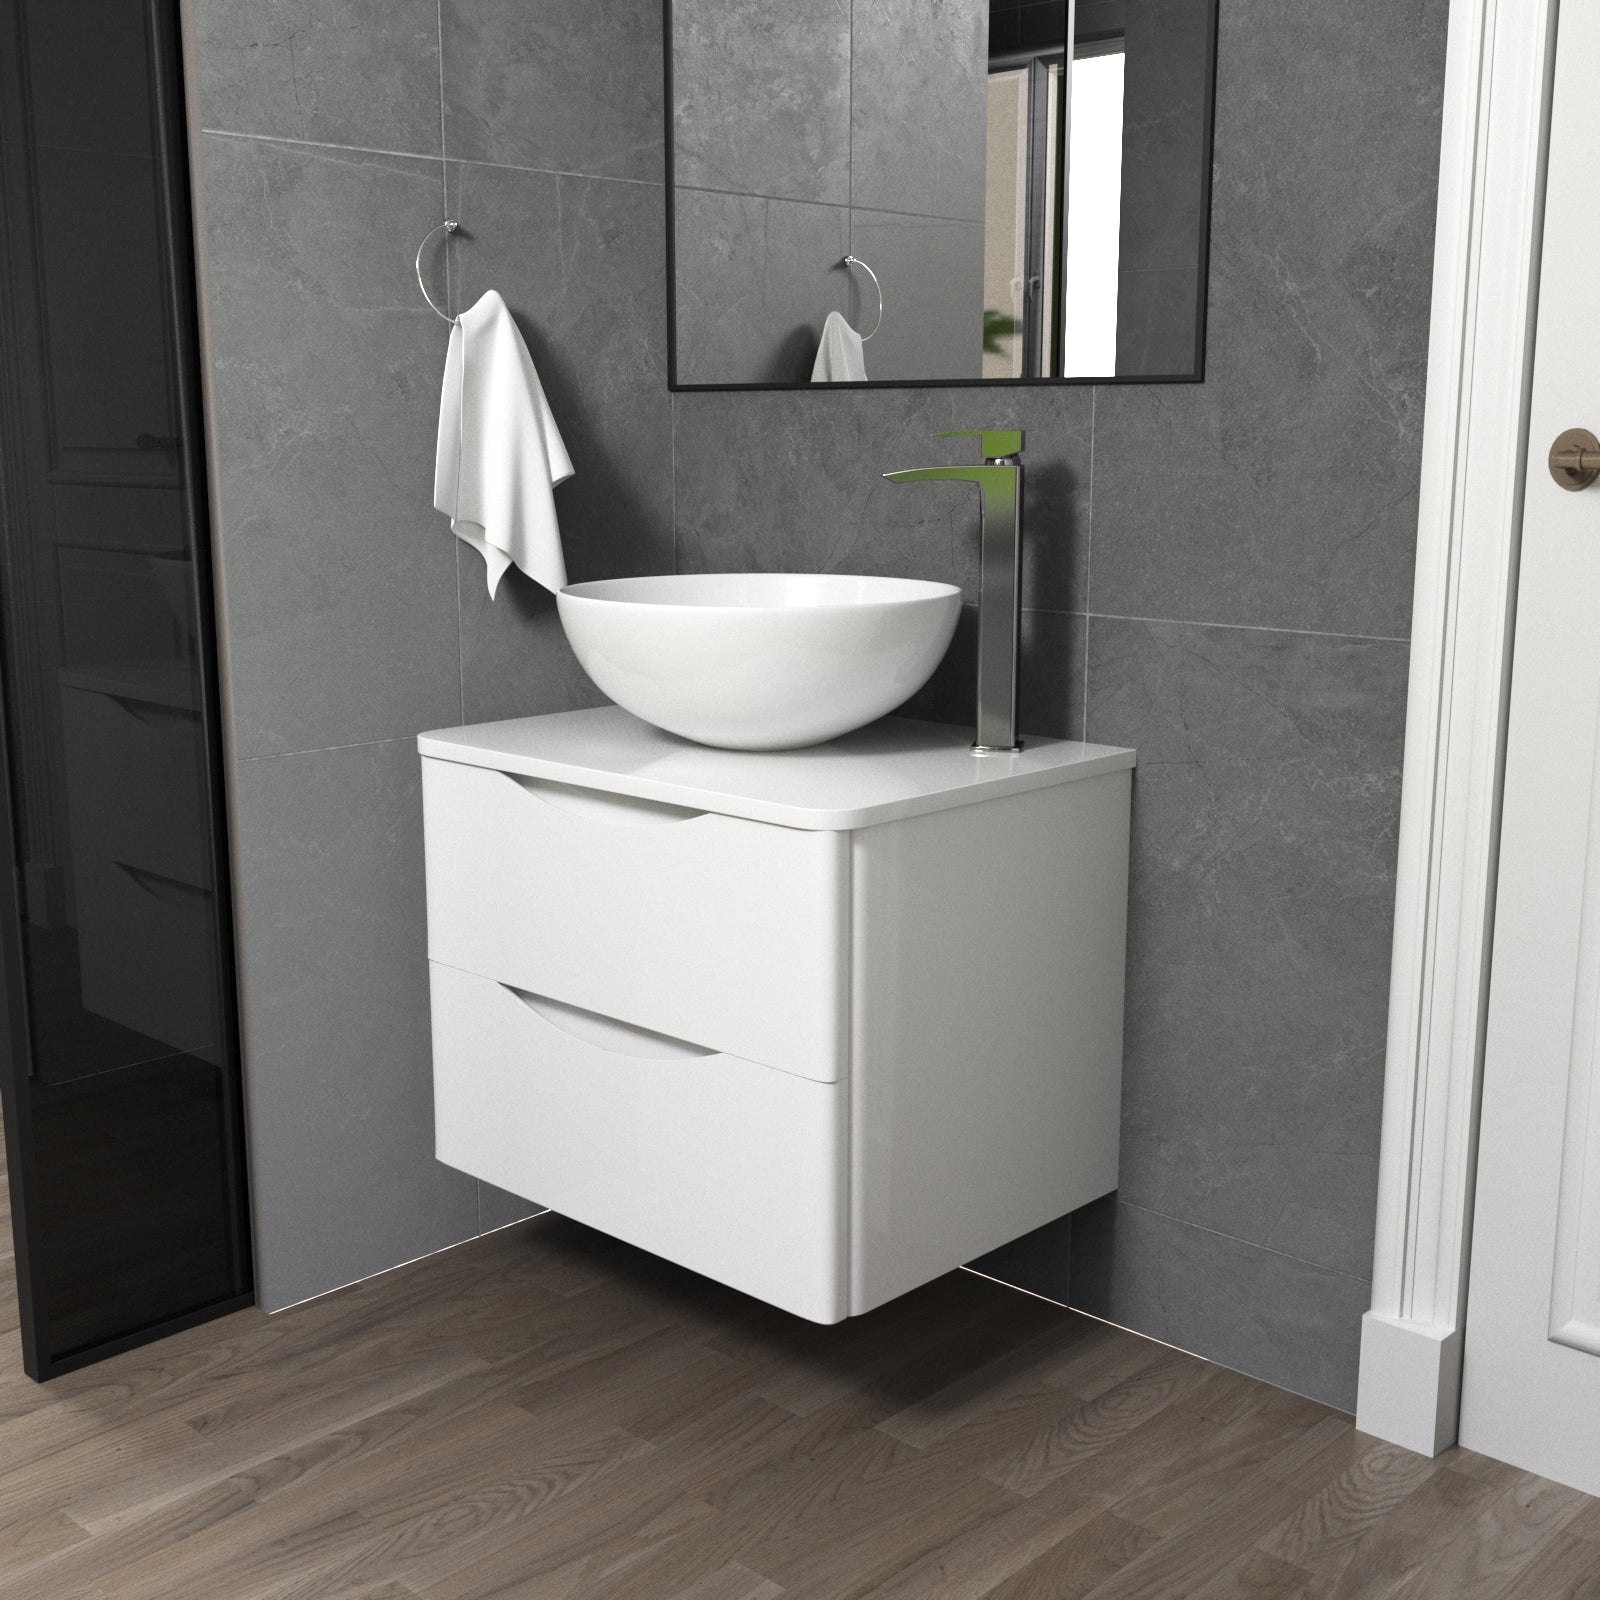 Merton White 600mm Bathroom Wall Hung Vanity Unit With Round Ceramic Countertop 420mm Basin